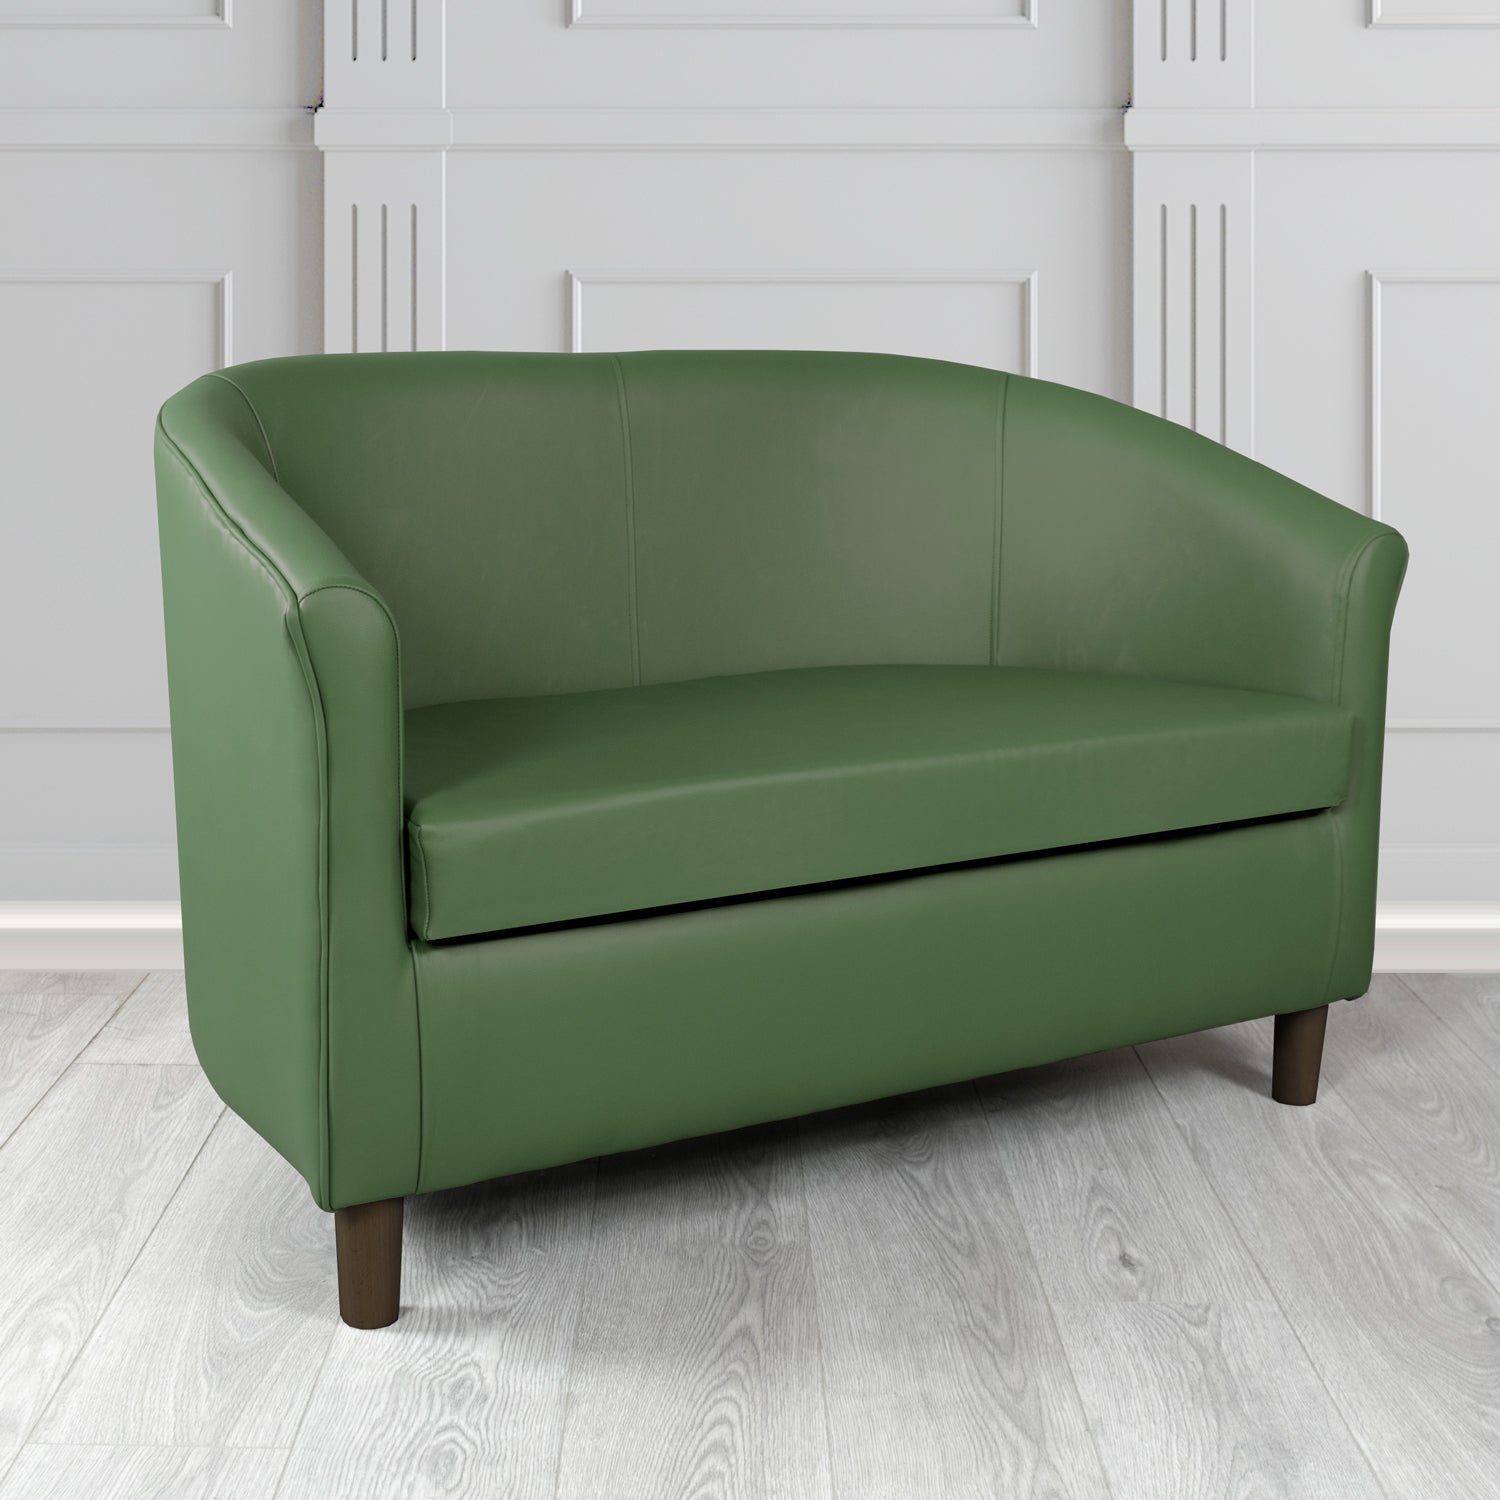 Tuscany Shelly Forest Green Crib 5 Genuine Leather 2 Seater Tub Sofa - The Tub Chair Shop